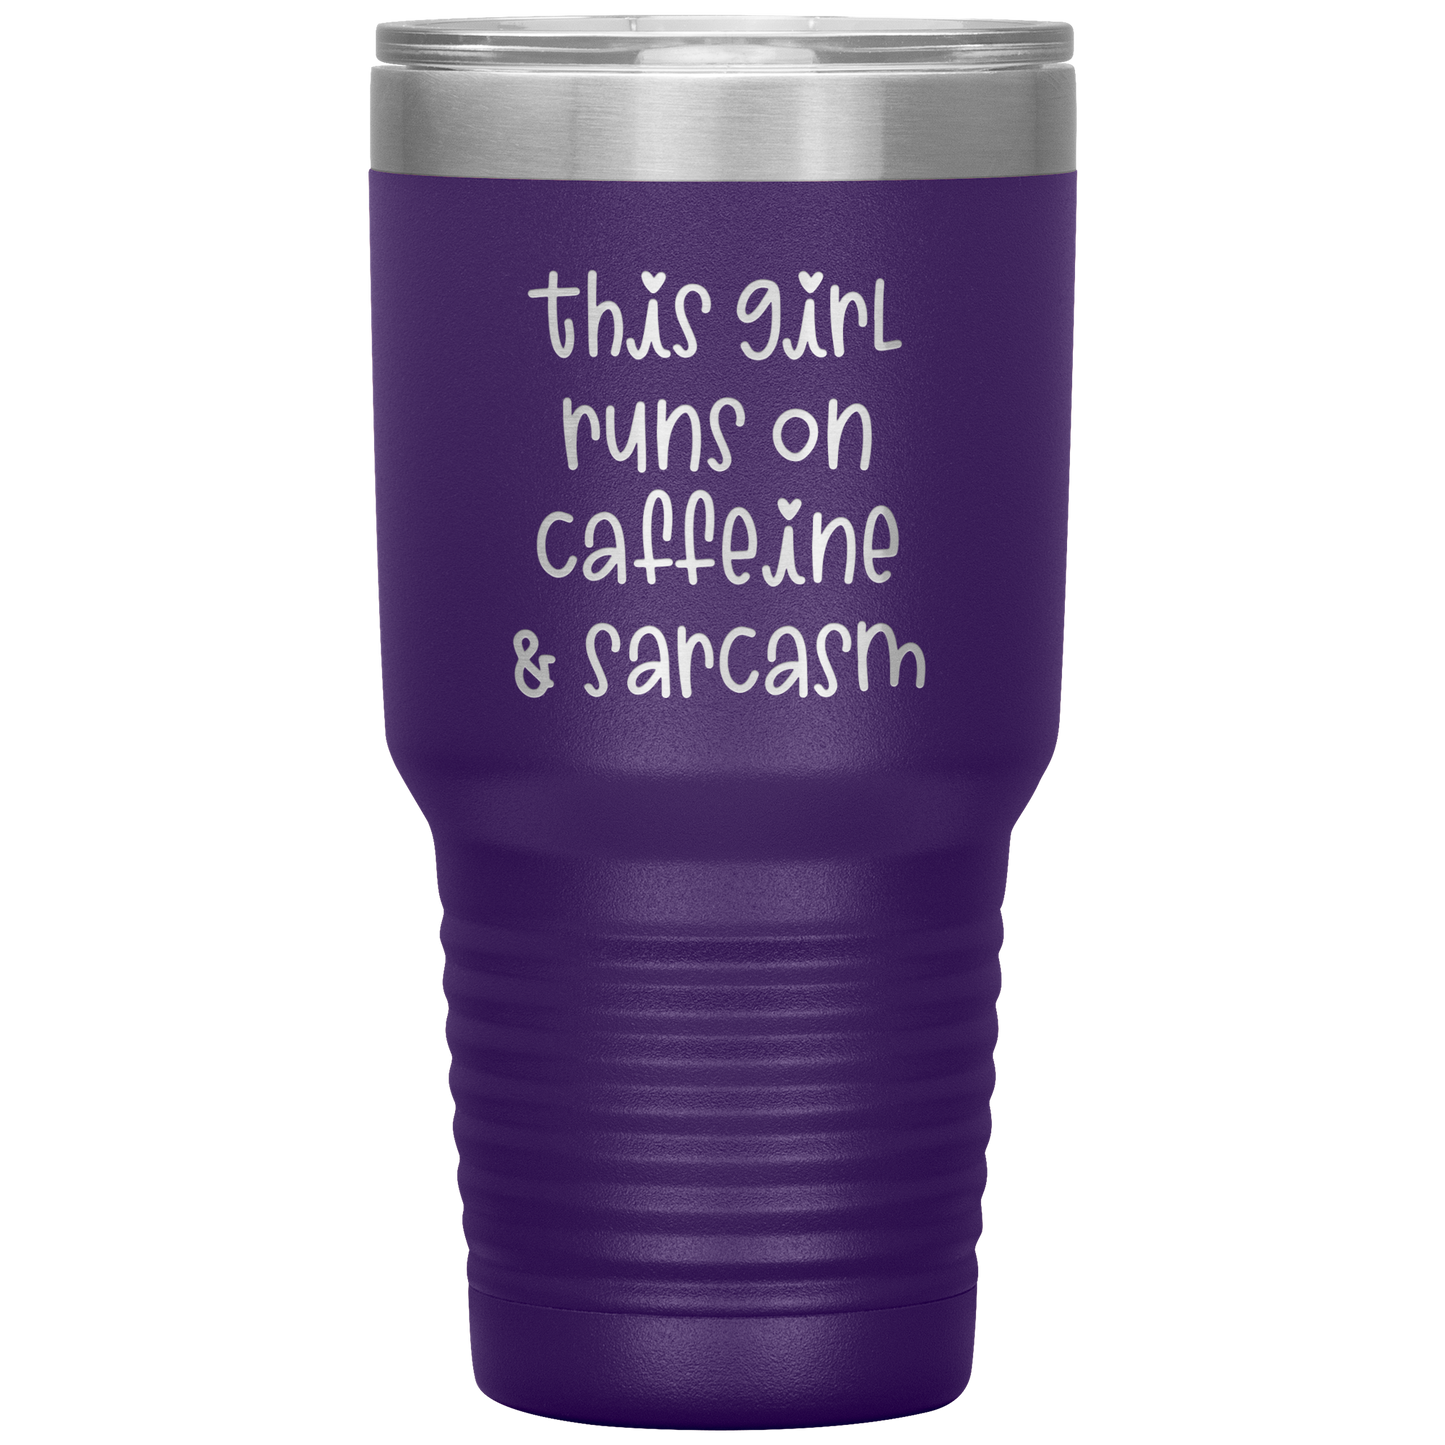 "This Girl Runs on Caffeine & Sarcasm" 30 oz. Insulated Stainless Steel Insulated Travel Coffee Cup with Lid